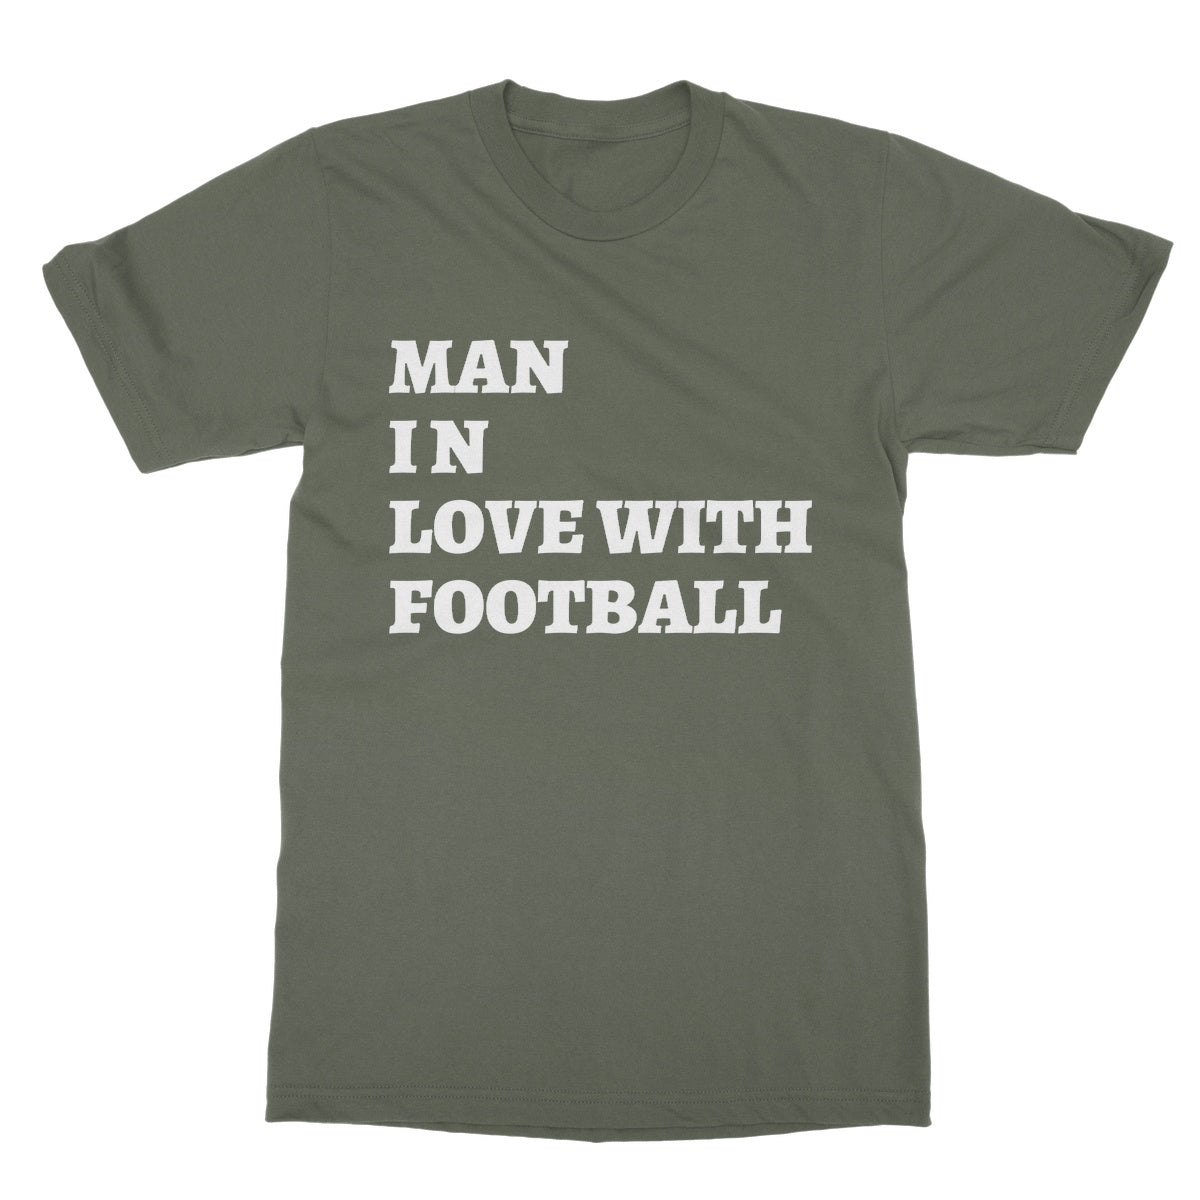 man in love with football t shirt green